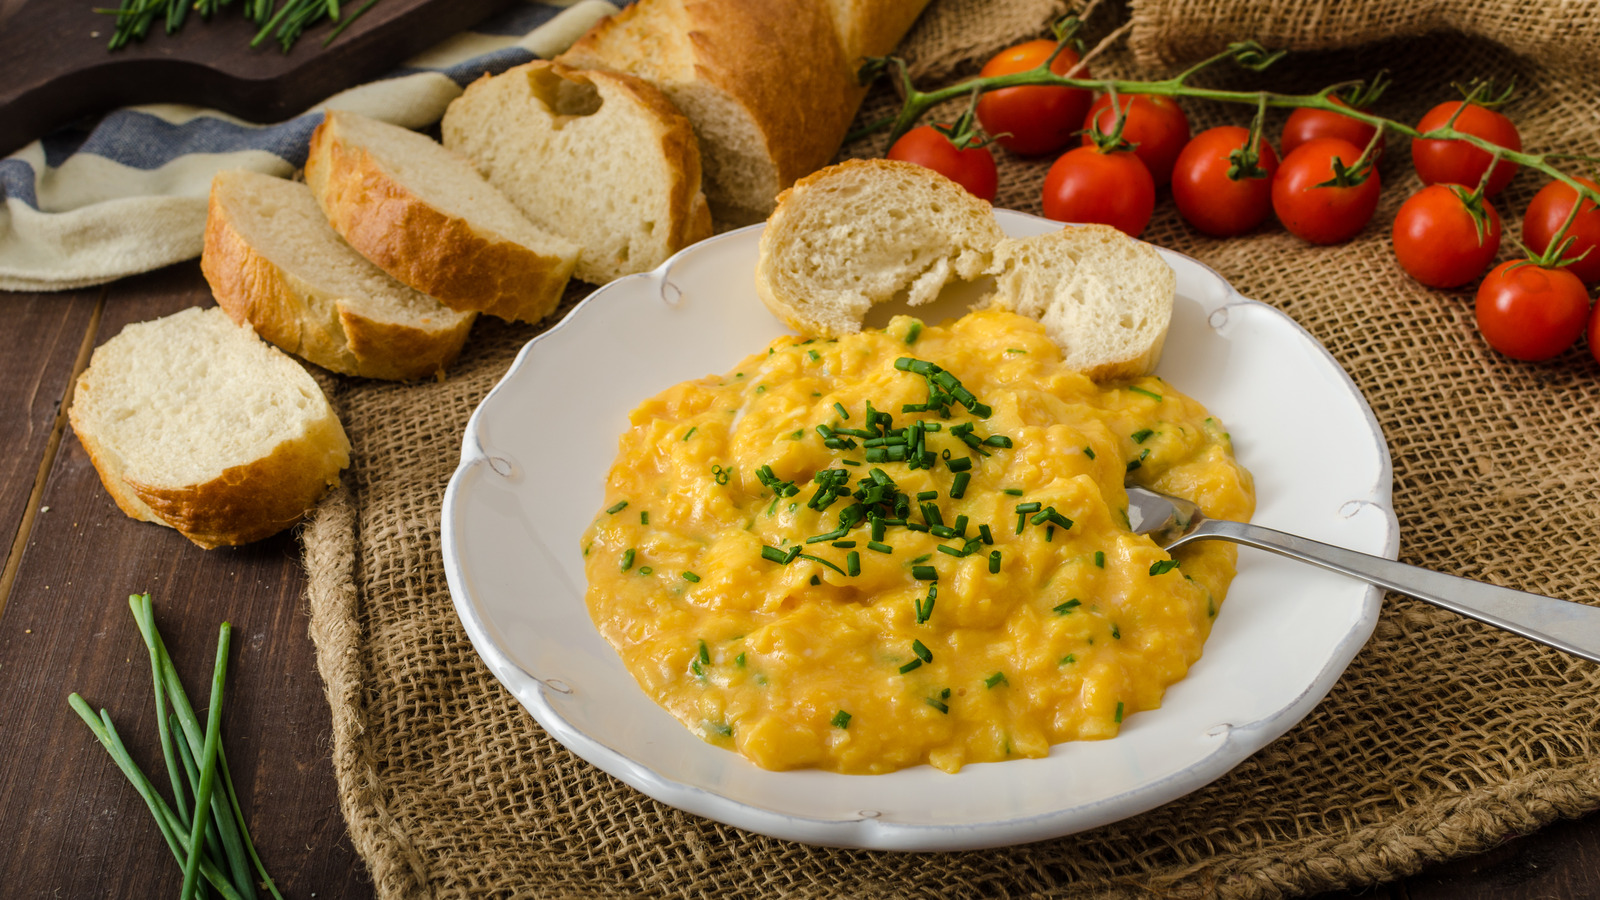 https://www.tastingtable.com/img/gallery/how-french-scrambled-eggs-differ-from-soft-scrambled/l-intro-1676643973.jpg